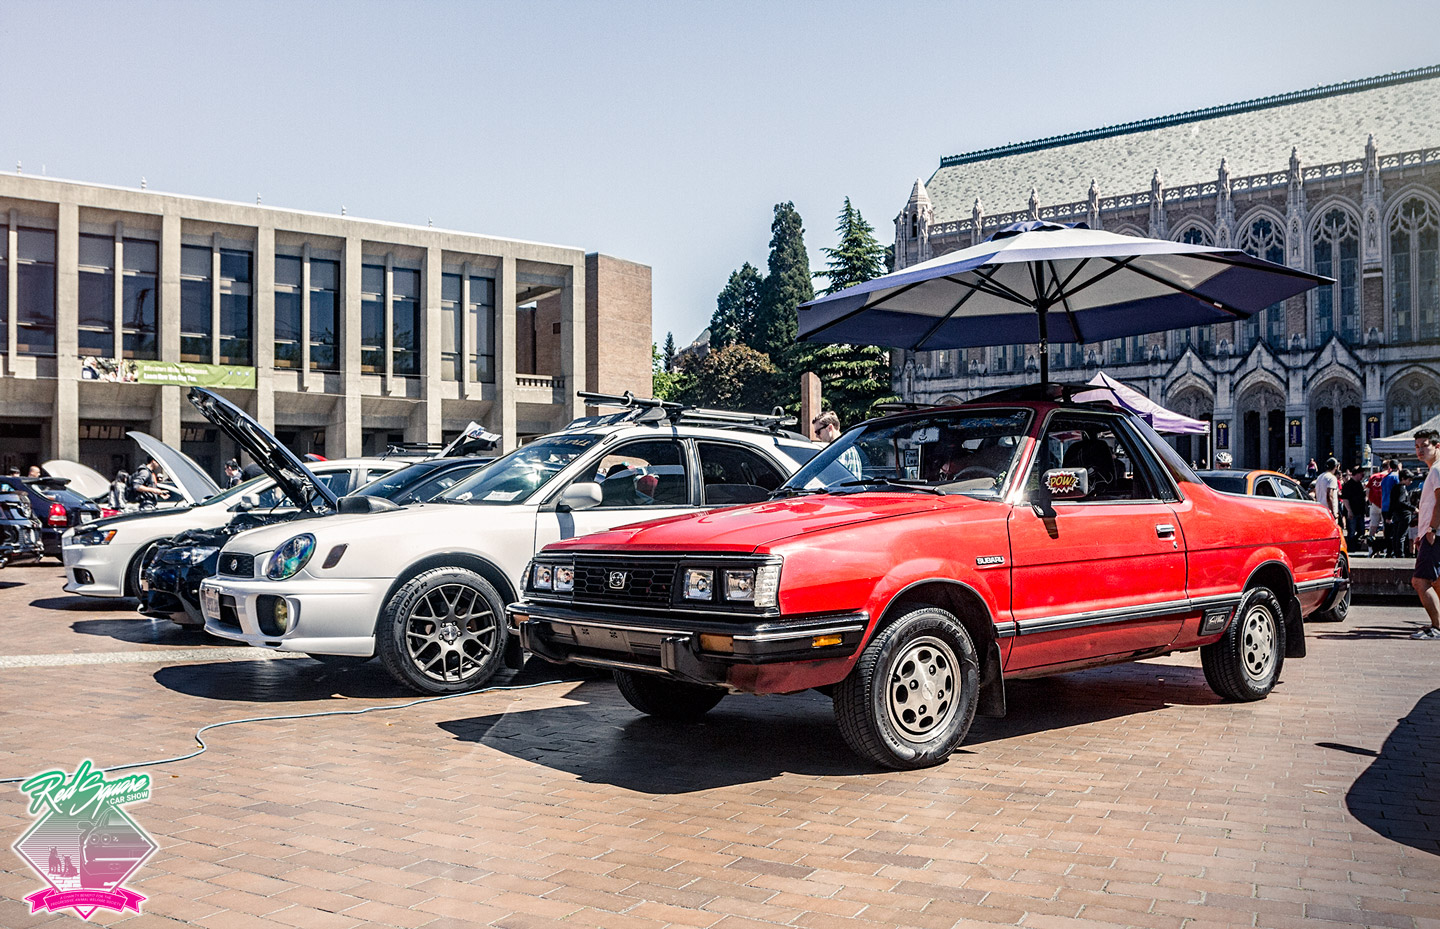 Red-Square-Car-Show-9-UW-Charity-Benefit-PAWS-org-subaru-brat-s